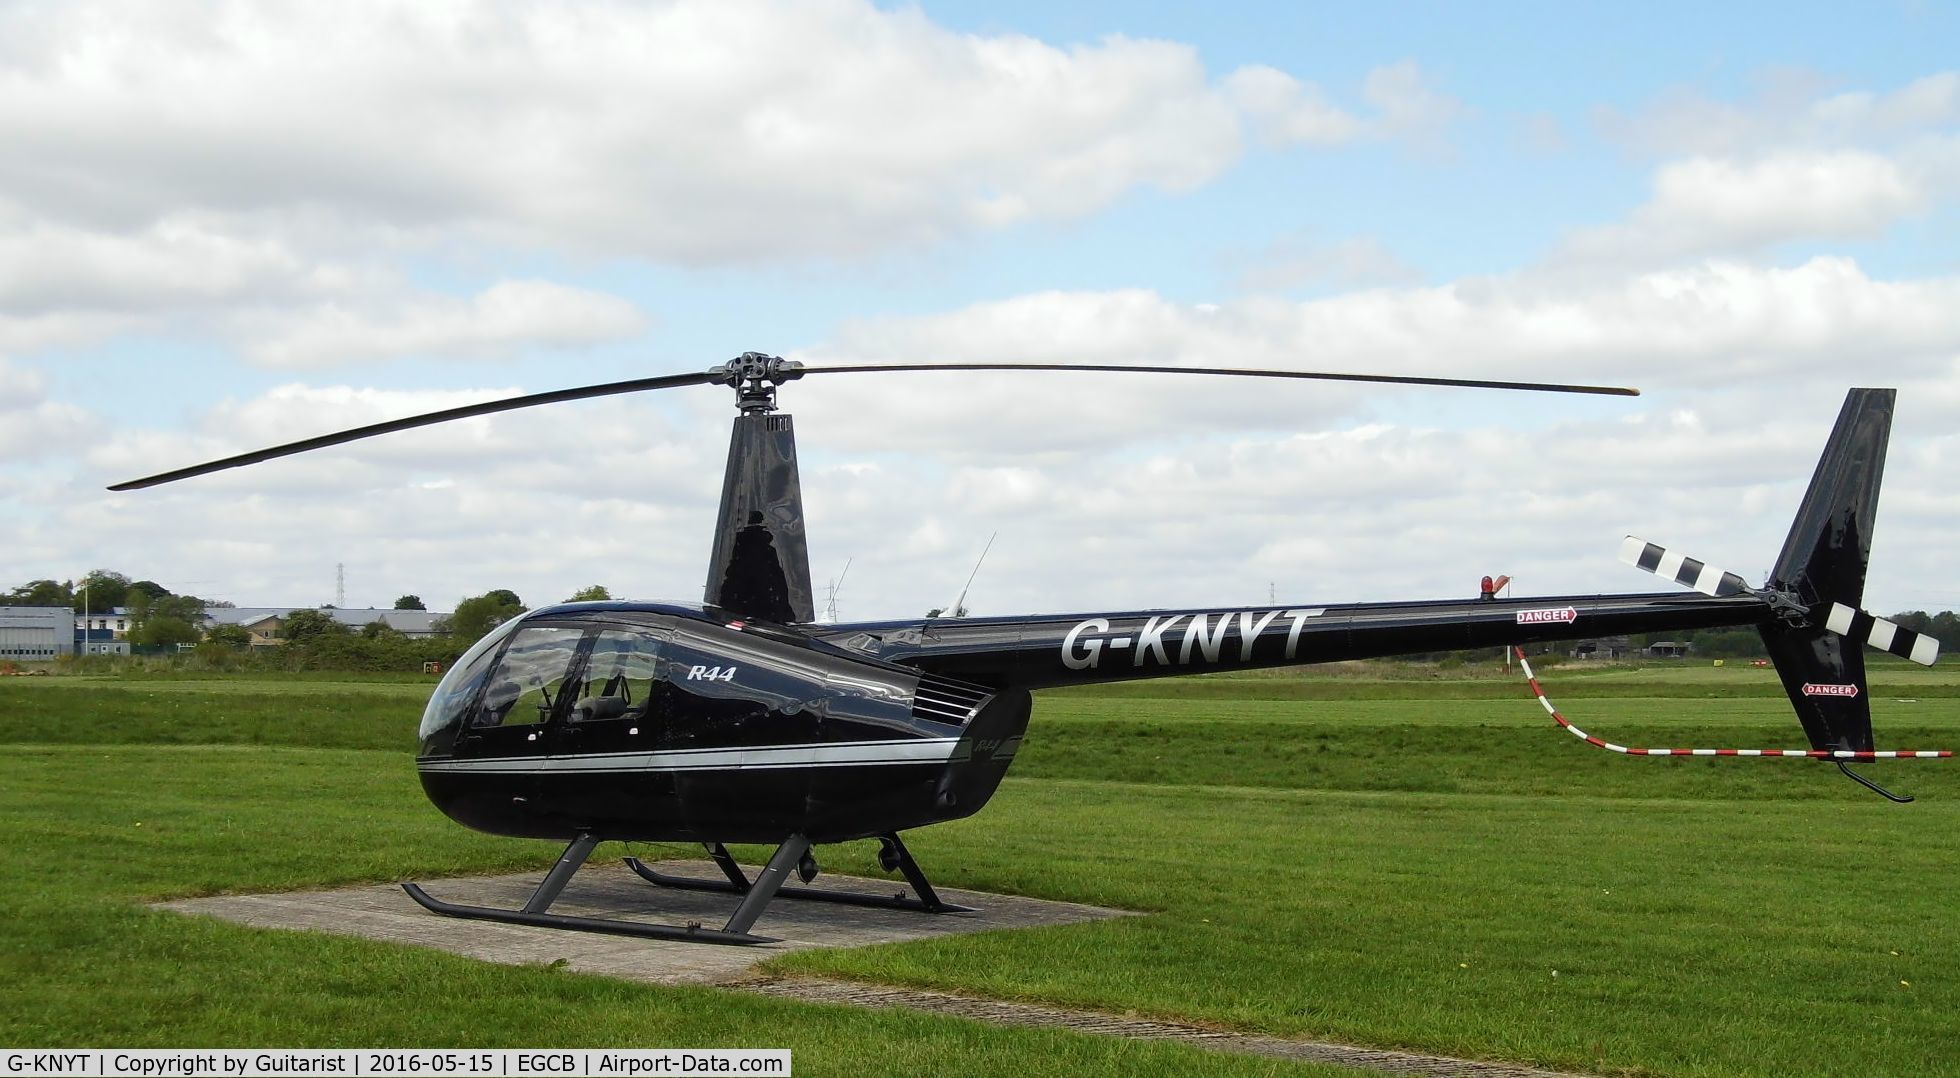 G-KNYT, 2000 Robinson R44 Astro C/N 0723, City Airport Manchester